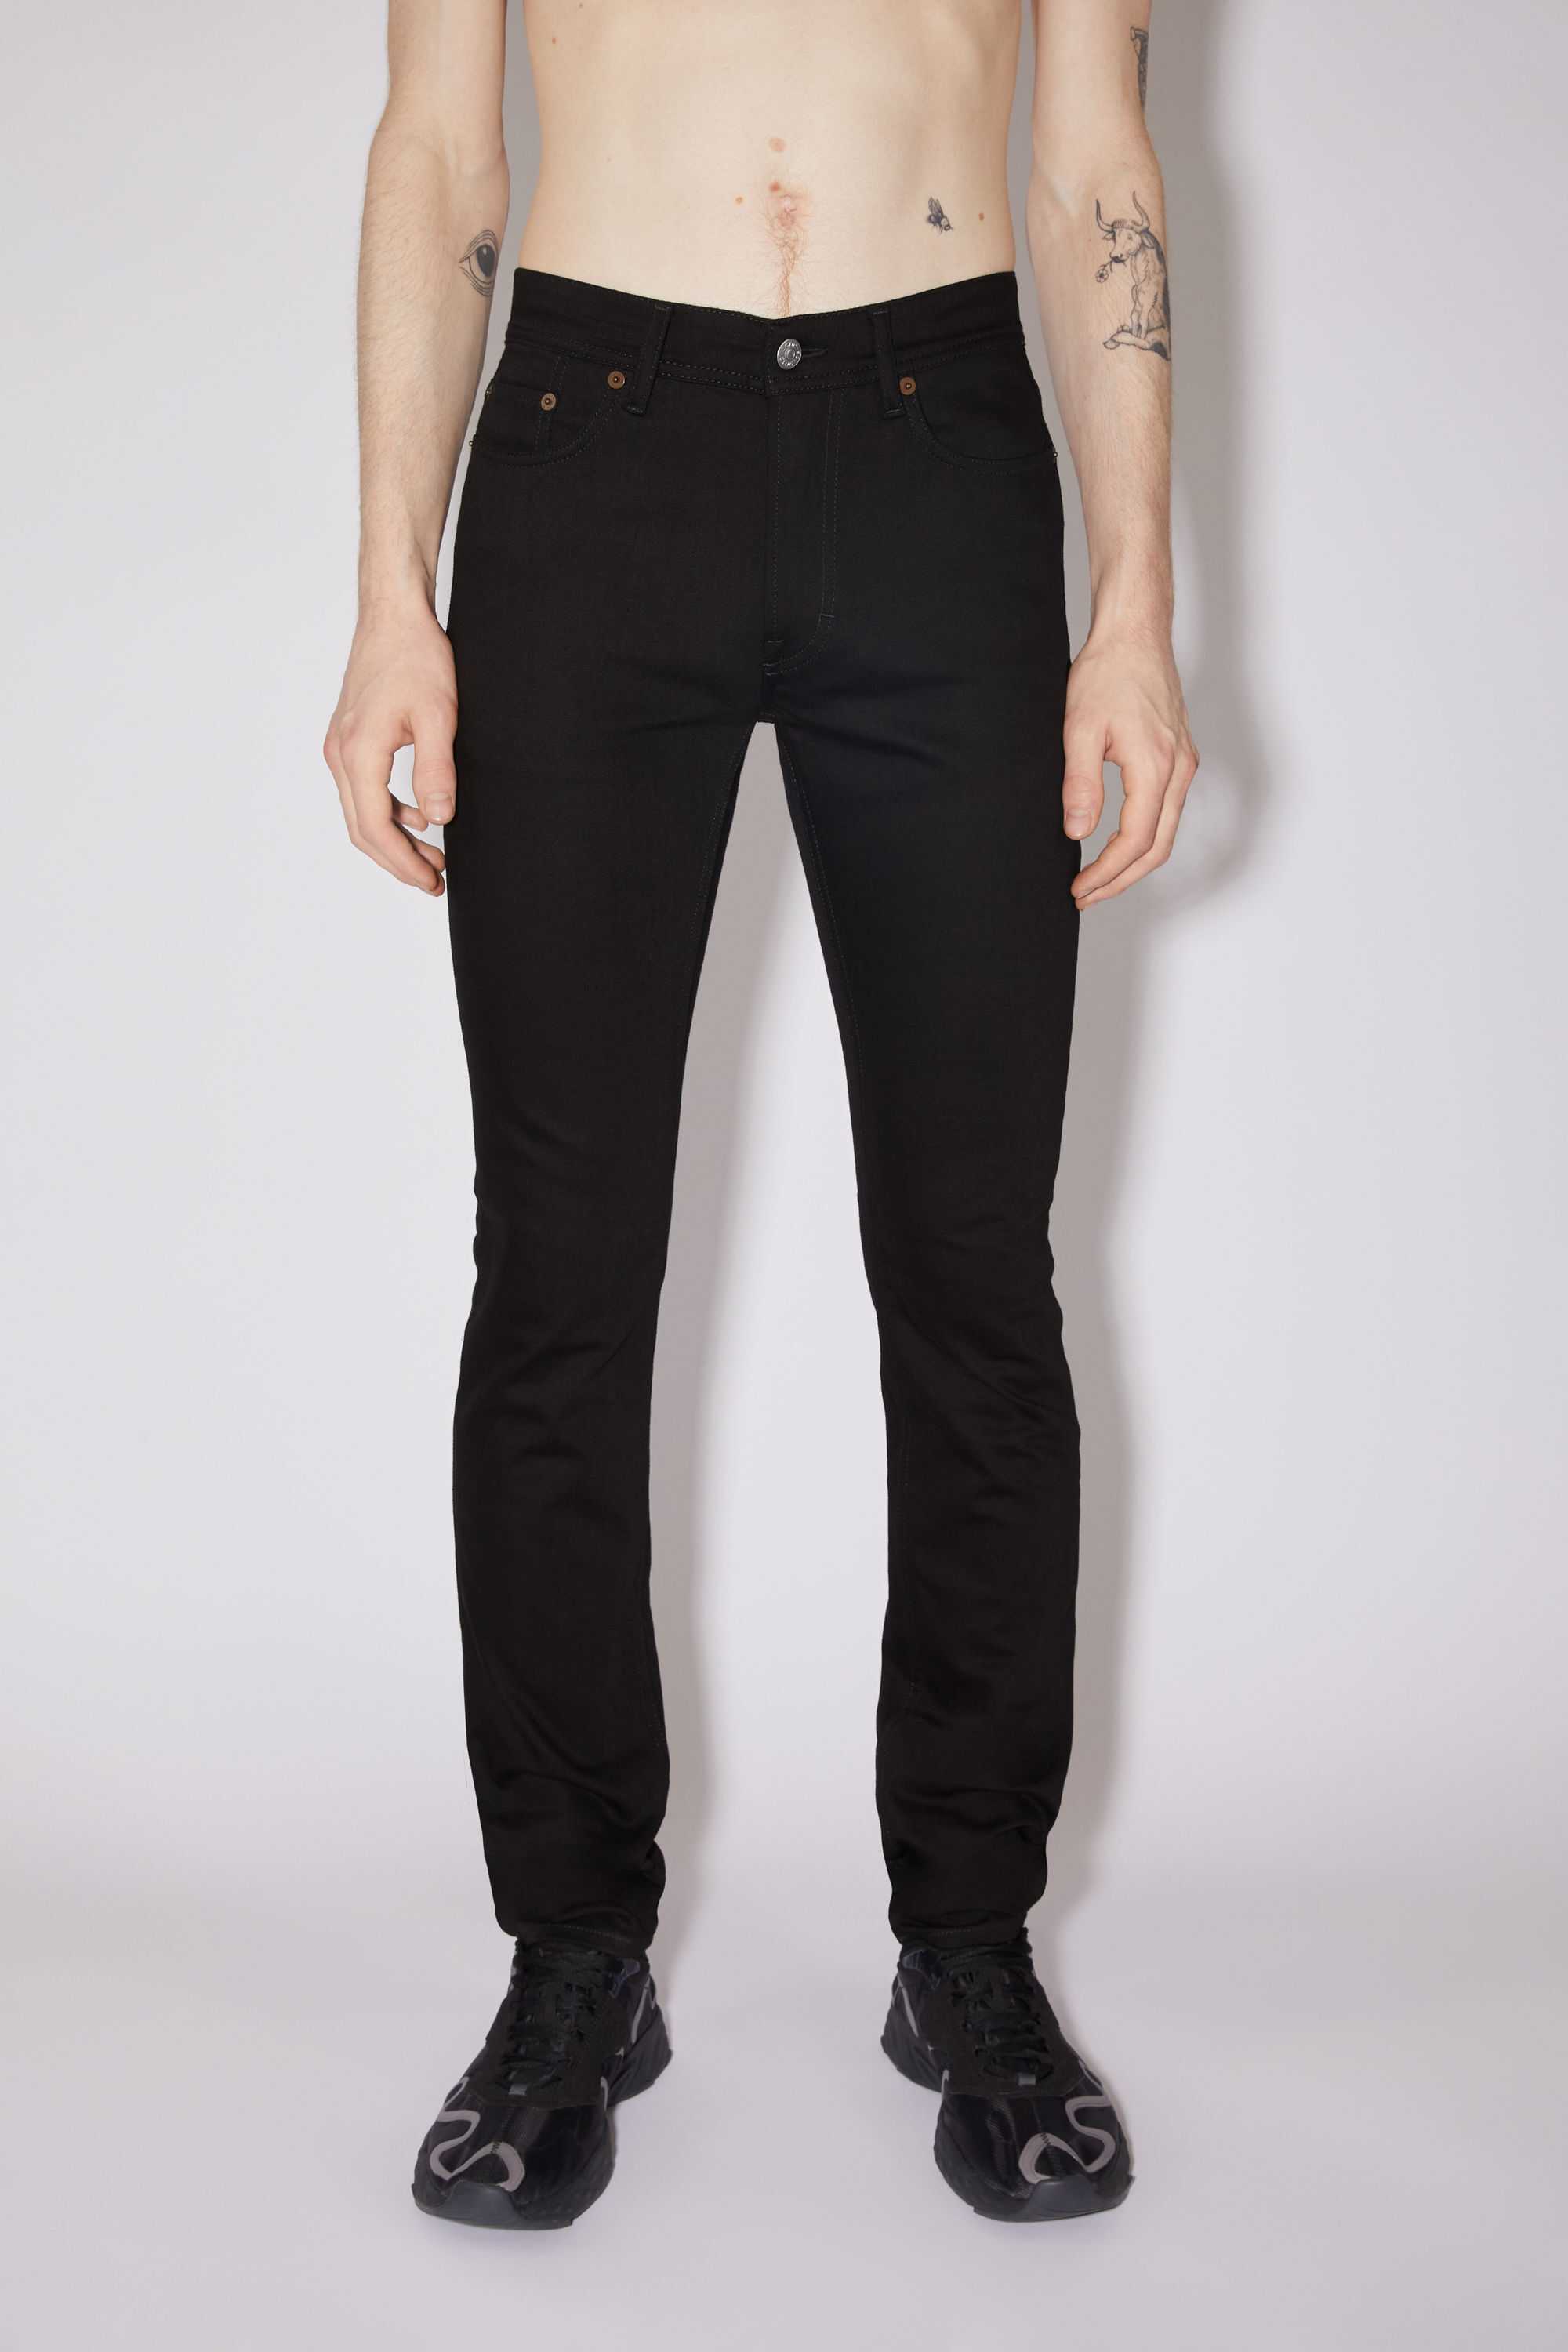 Buy Solid Black Skinny Comfort Stretch Jeans from the Next UK online shop